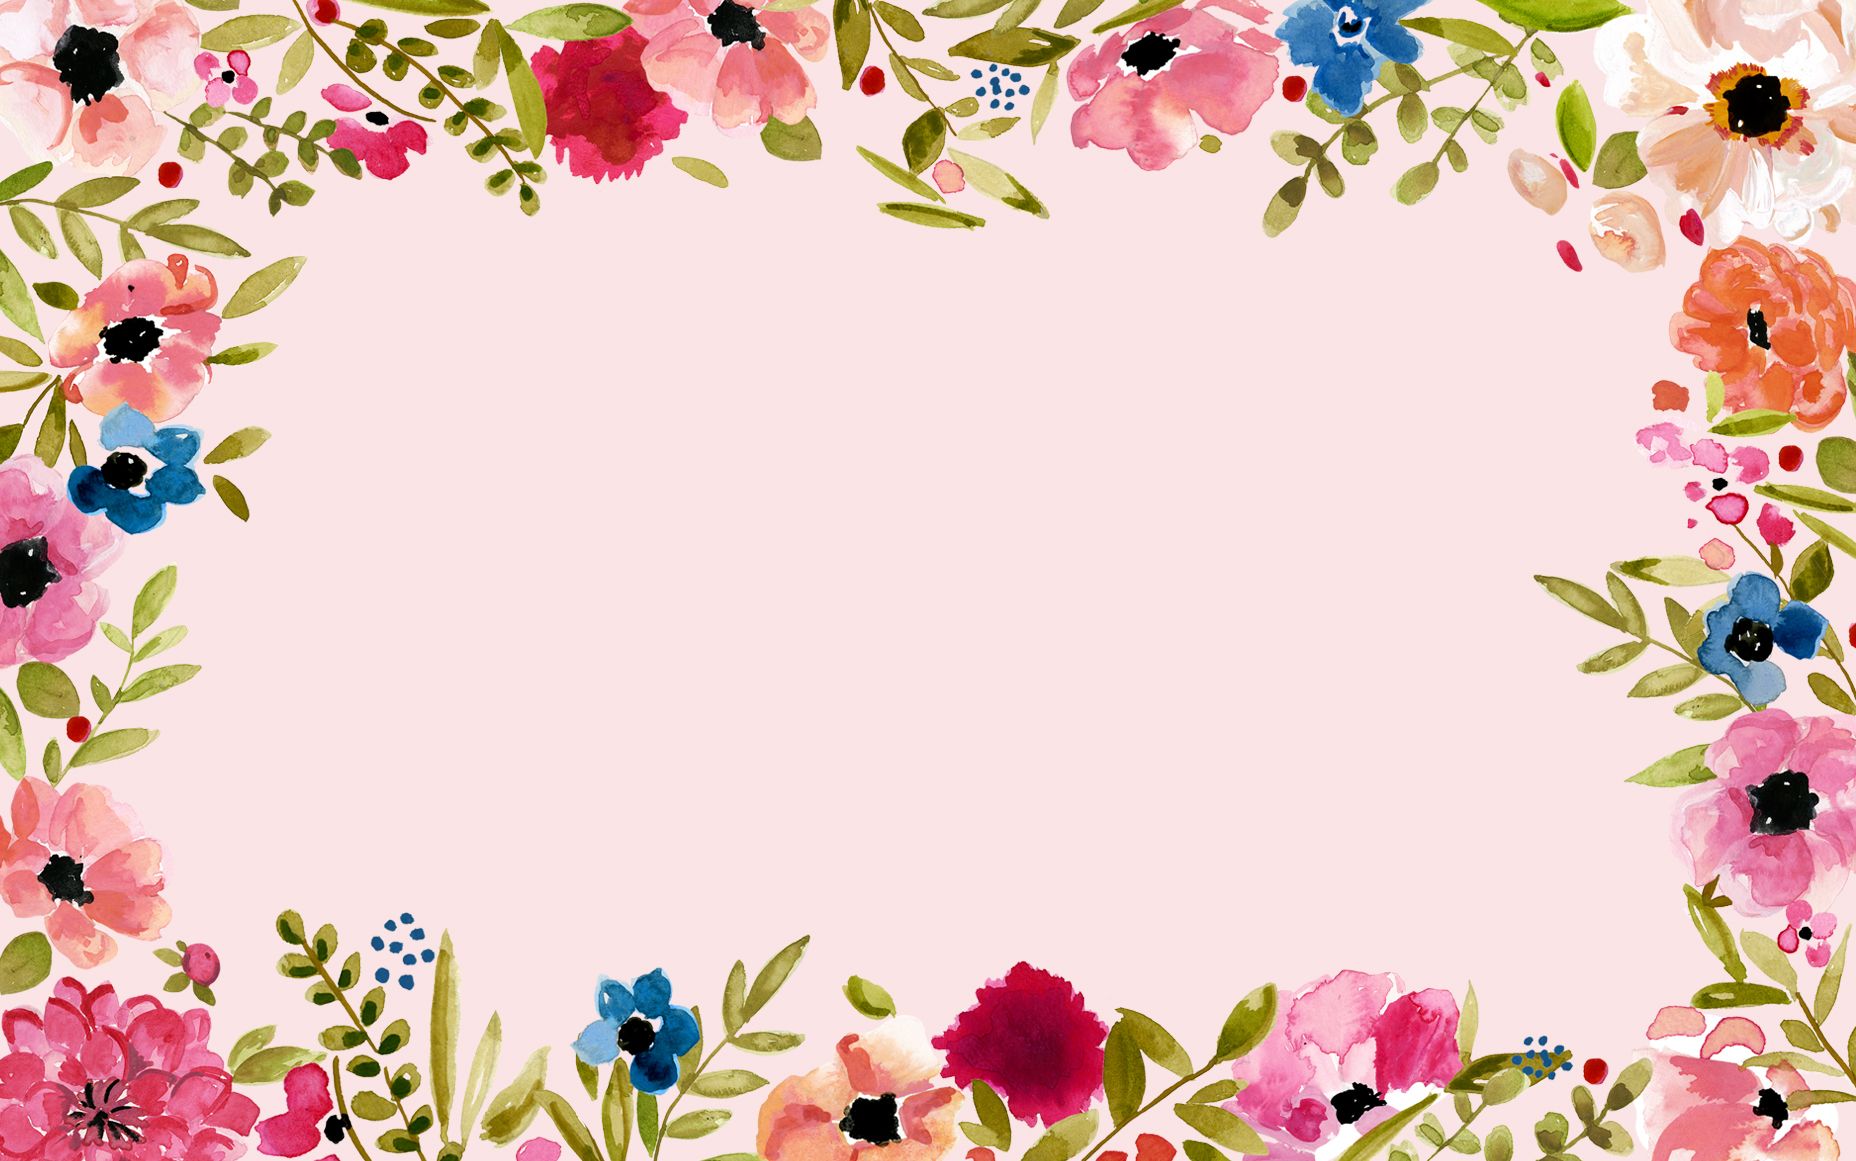 Girly Background For Laptop. Laptop